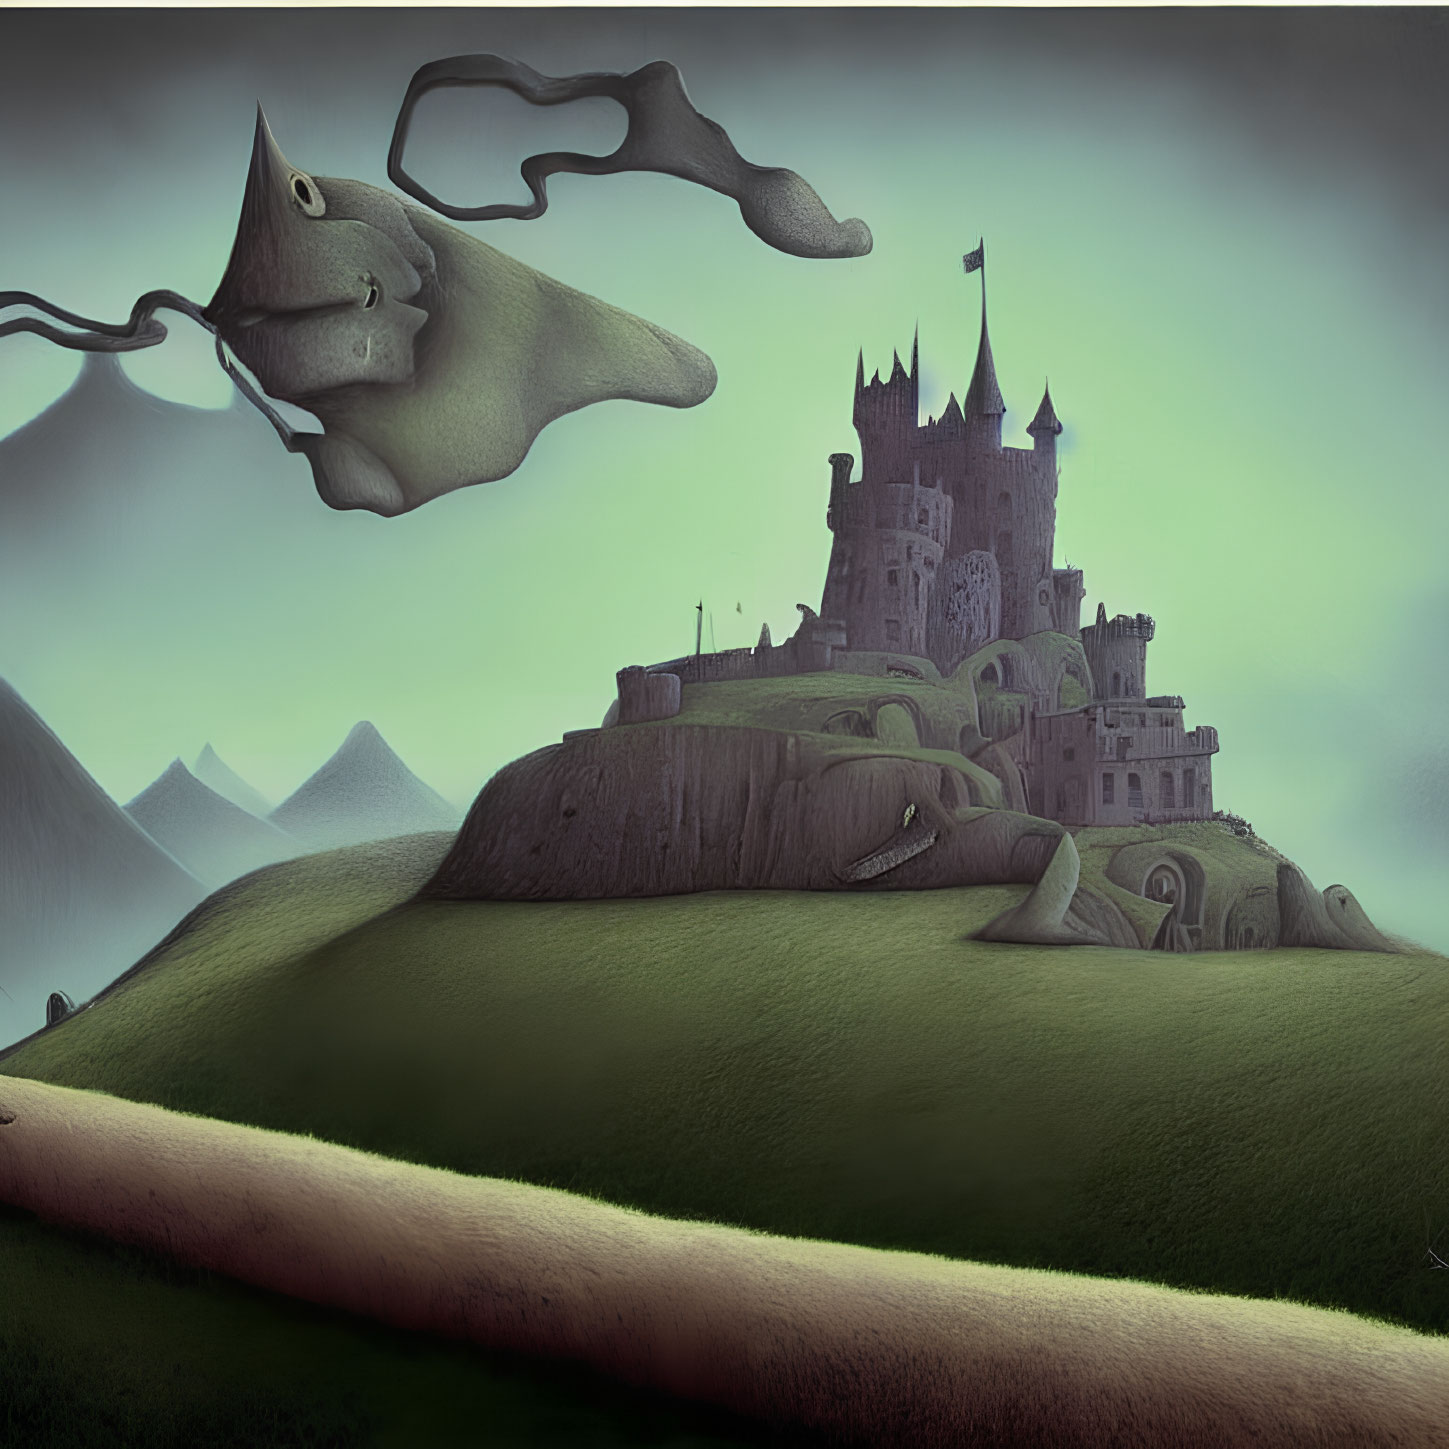 Surreal green landscape with castle, flying creature, misty mountains